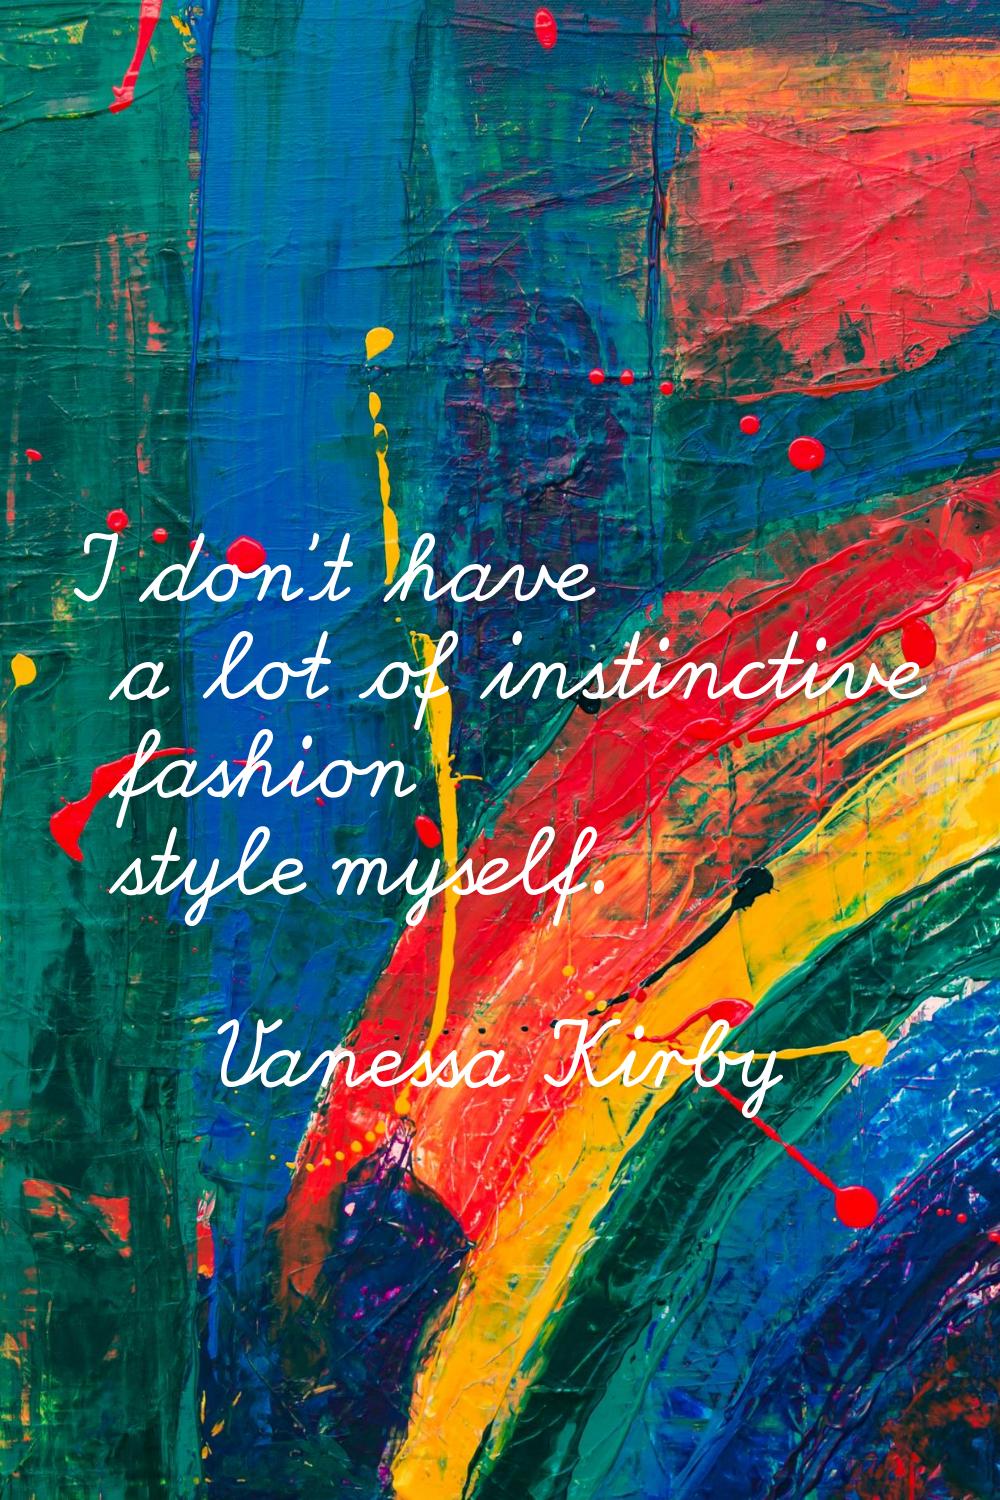 I don't have a lot of instinctive fashion style myself.